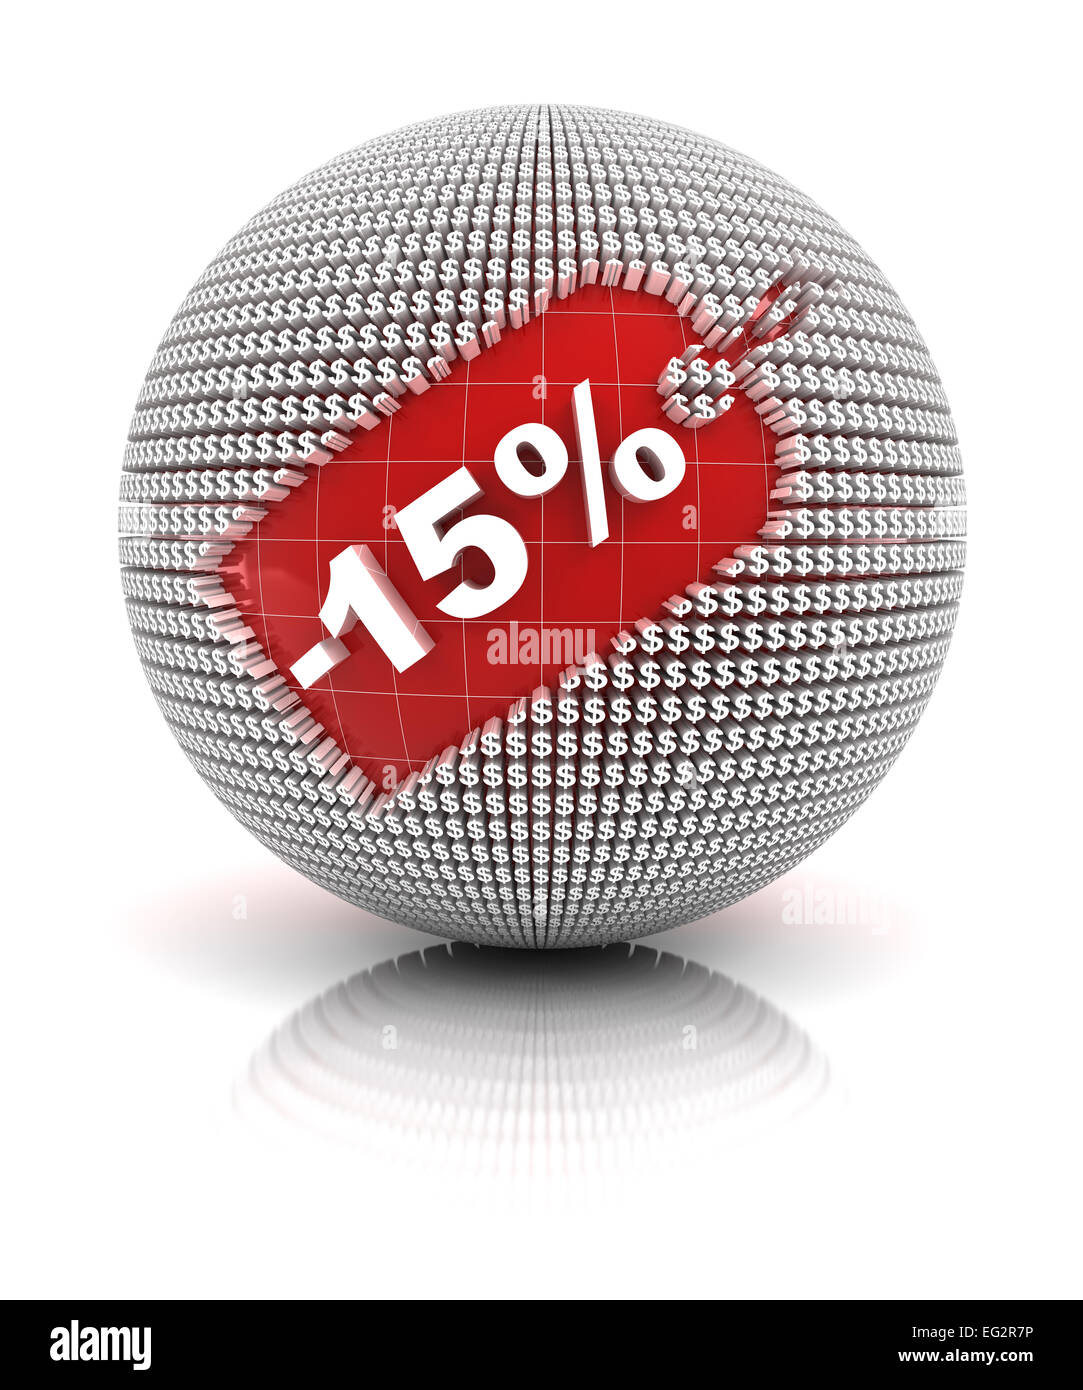 15 percent off sale tag on a sphere Stock Photo